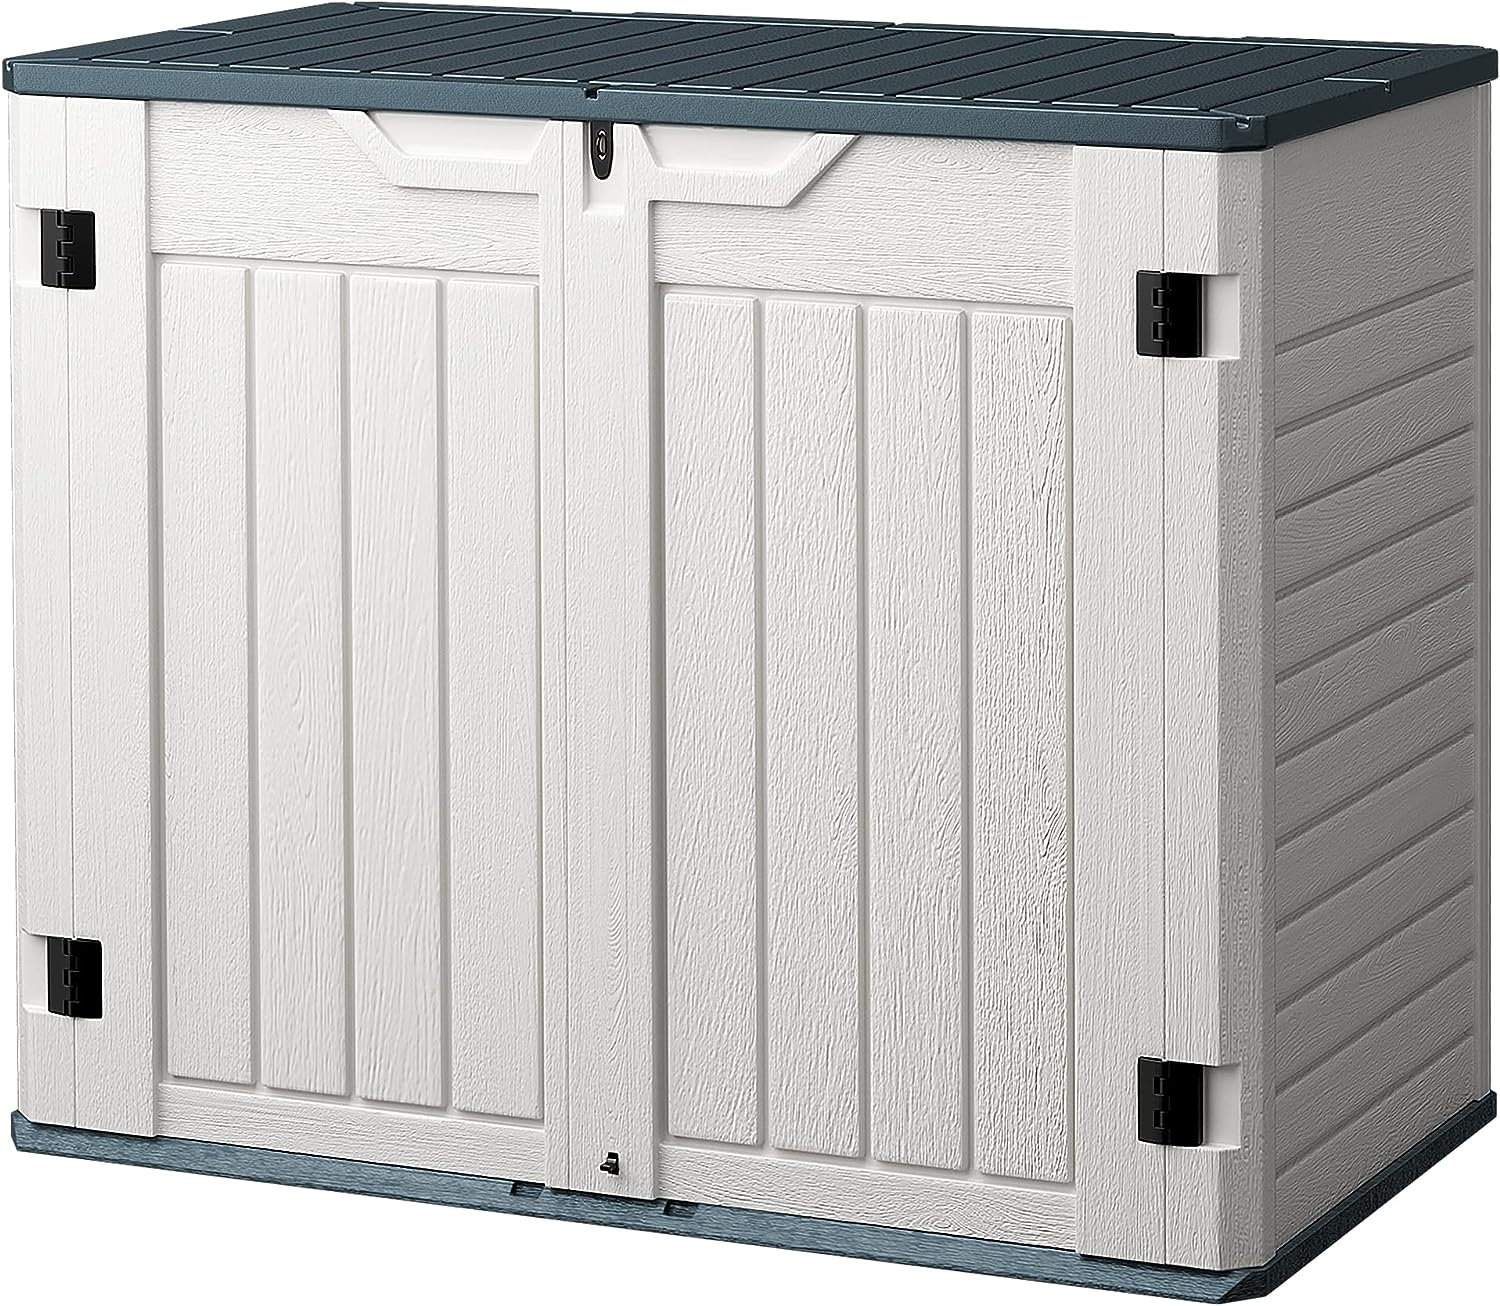 Homall Resin Outdoor Storage Shed 28 Cu Ft Horizontal [...]